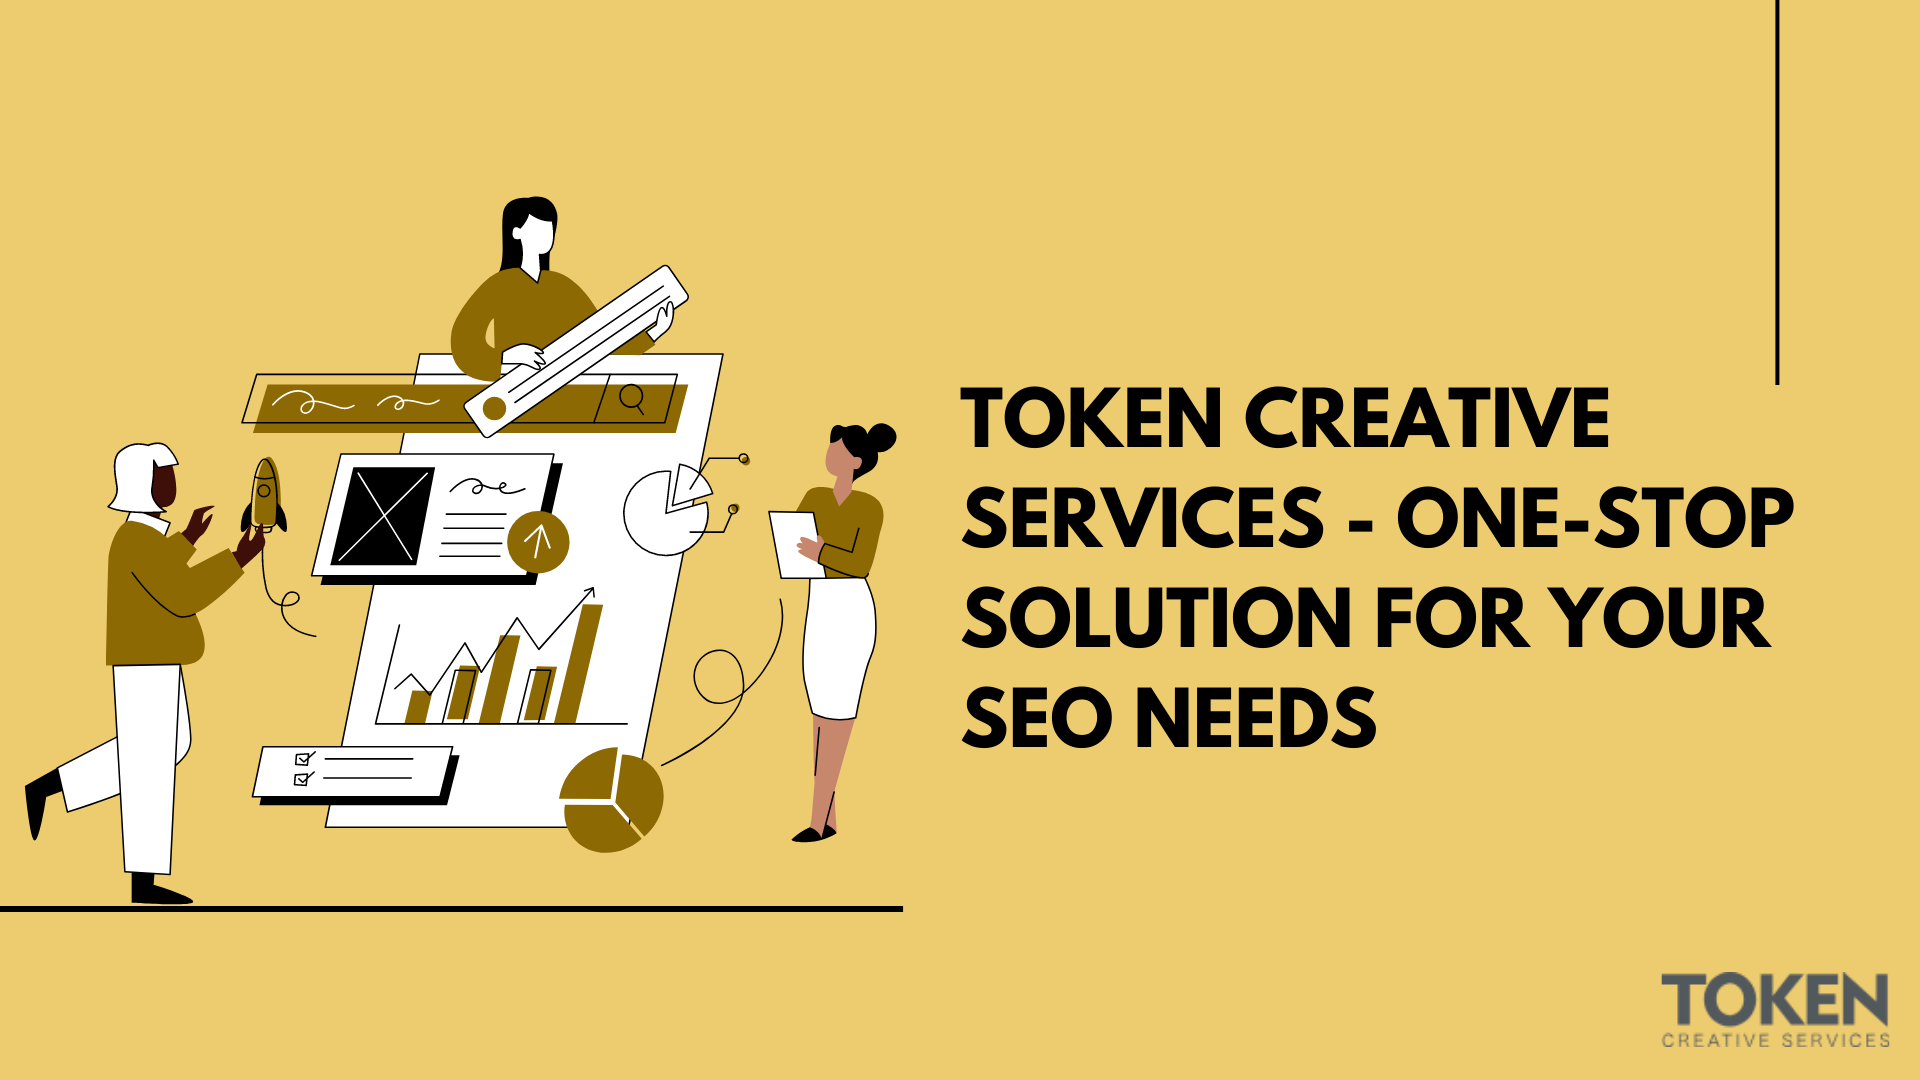 Token Creative Services - One-Stop Solution for Your SEO Needs